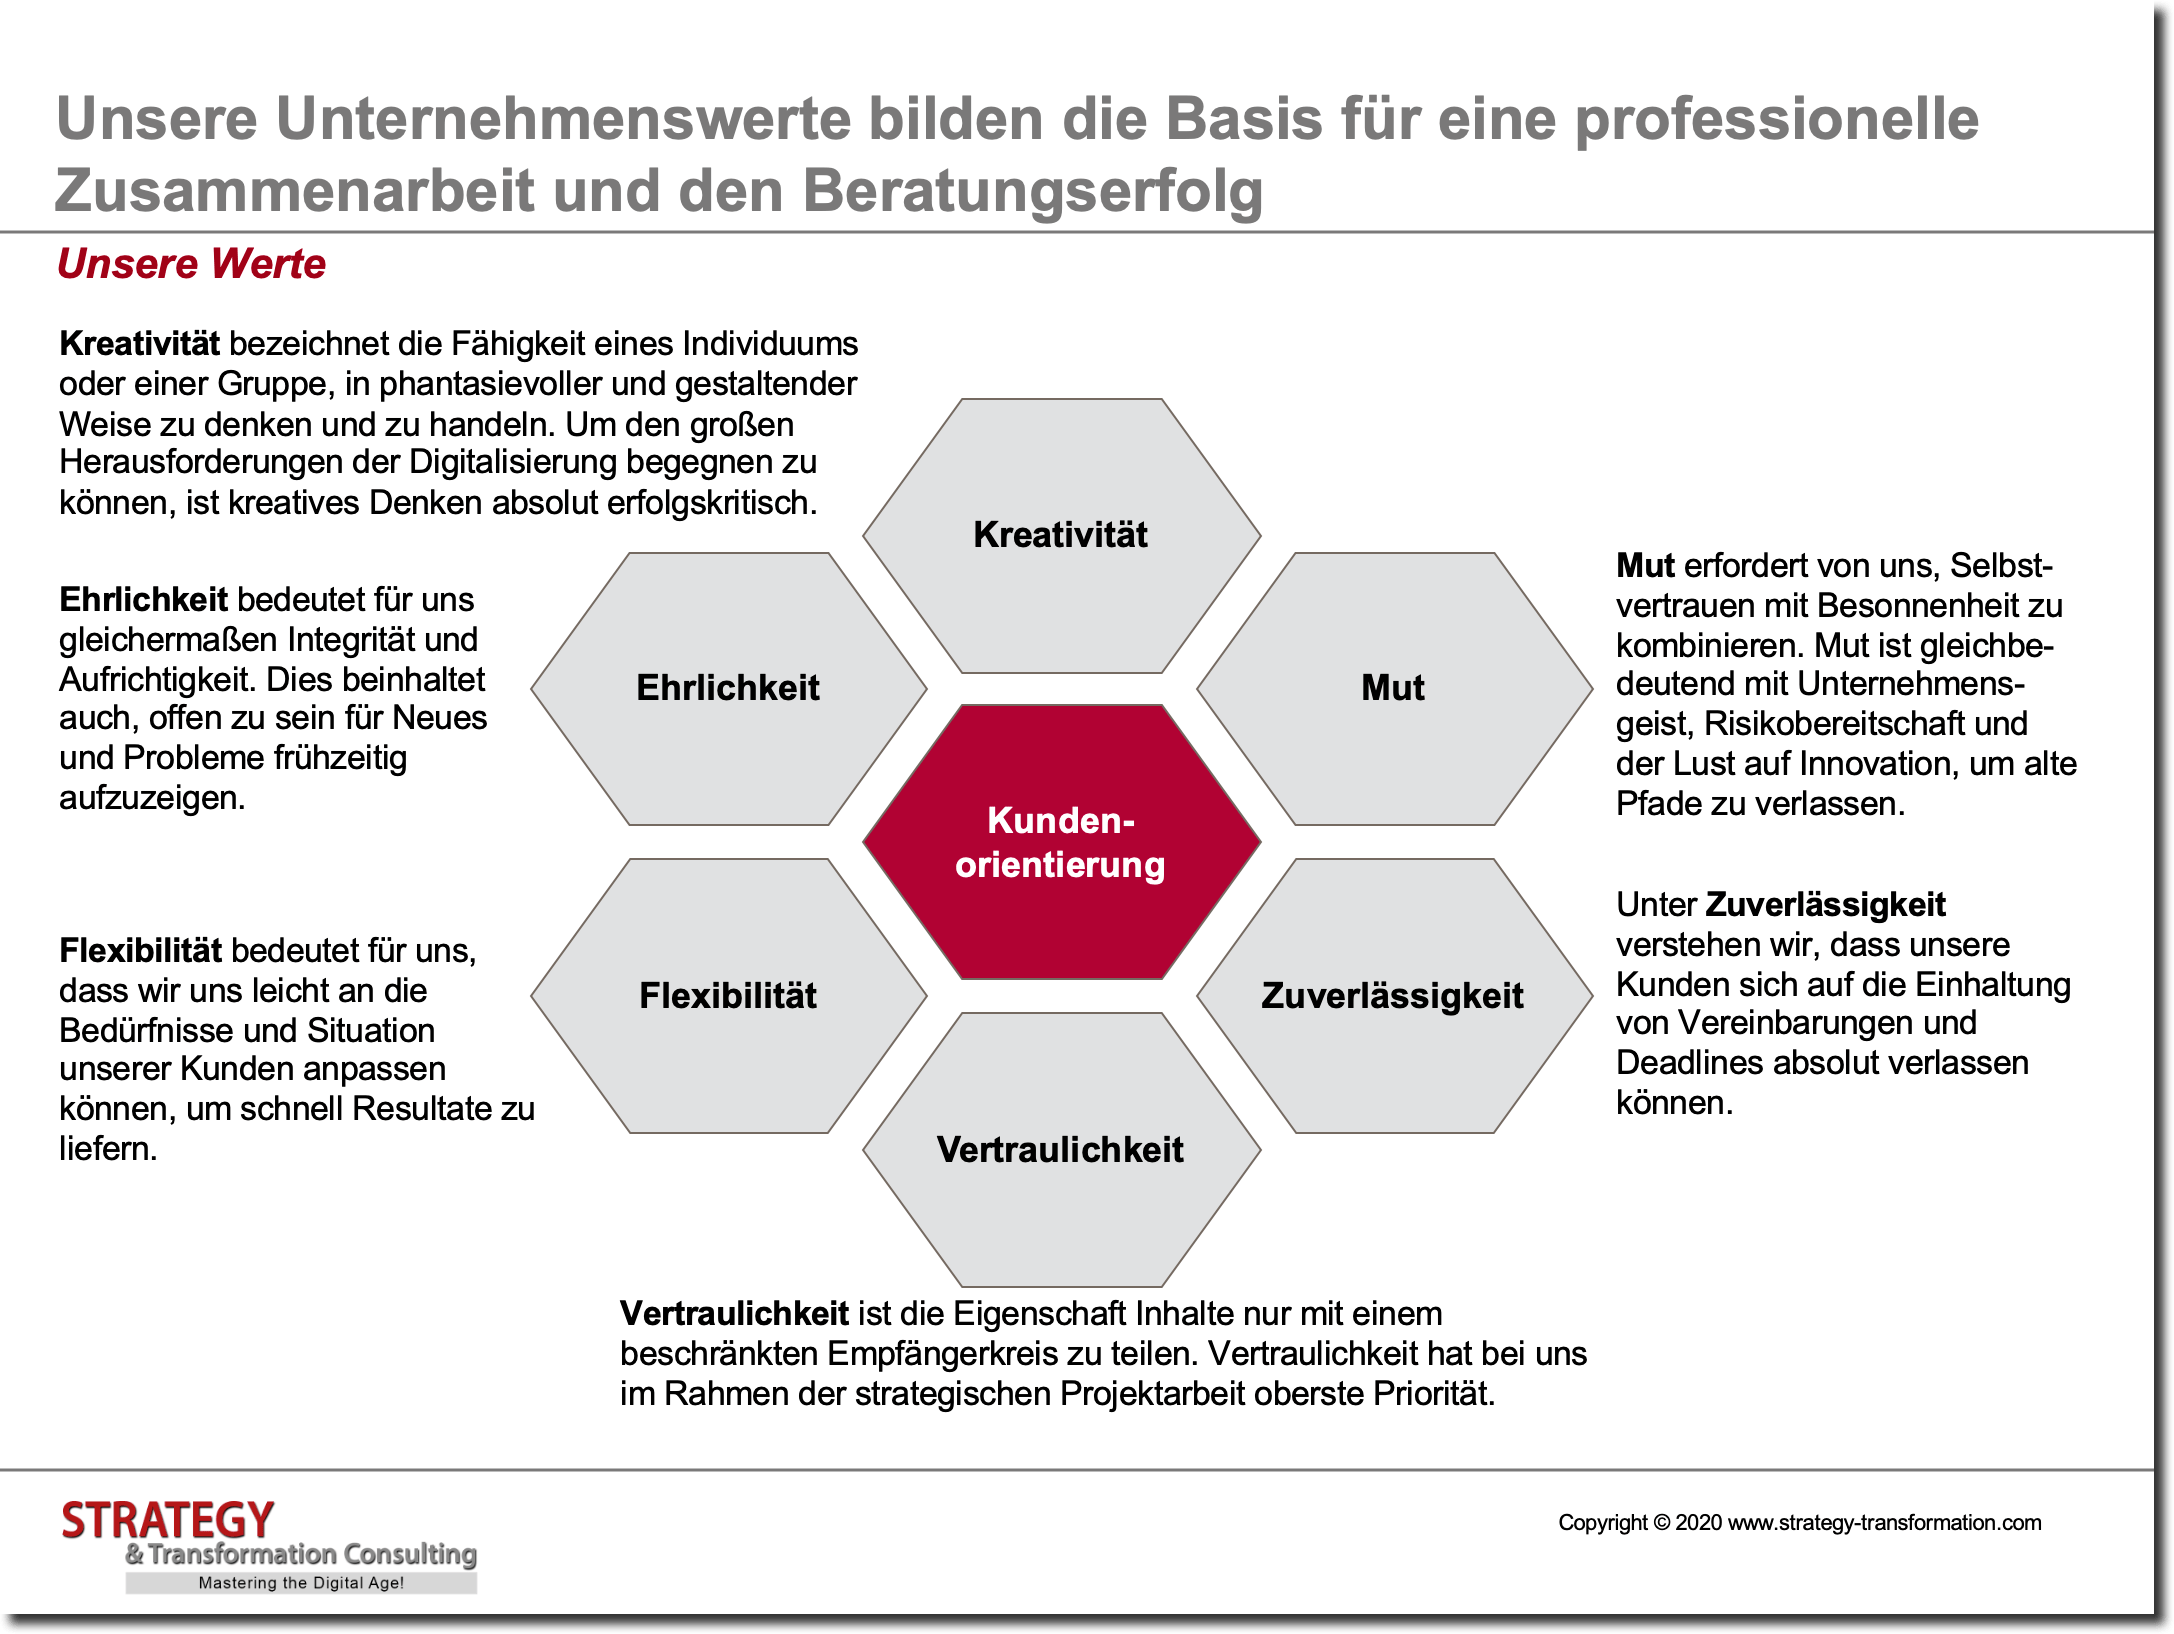 Unsere Werte - Strategy & Transformation Consulting